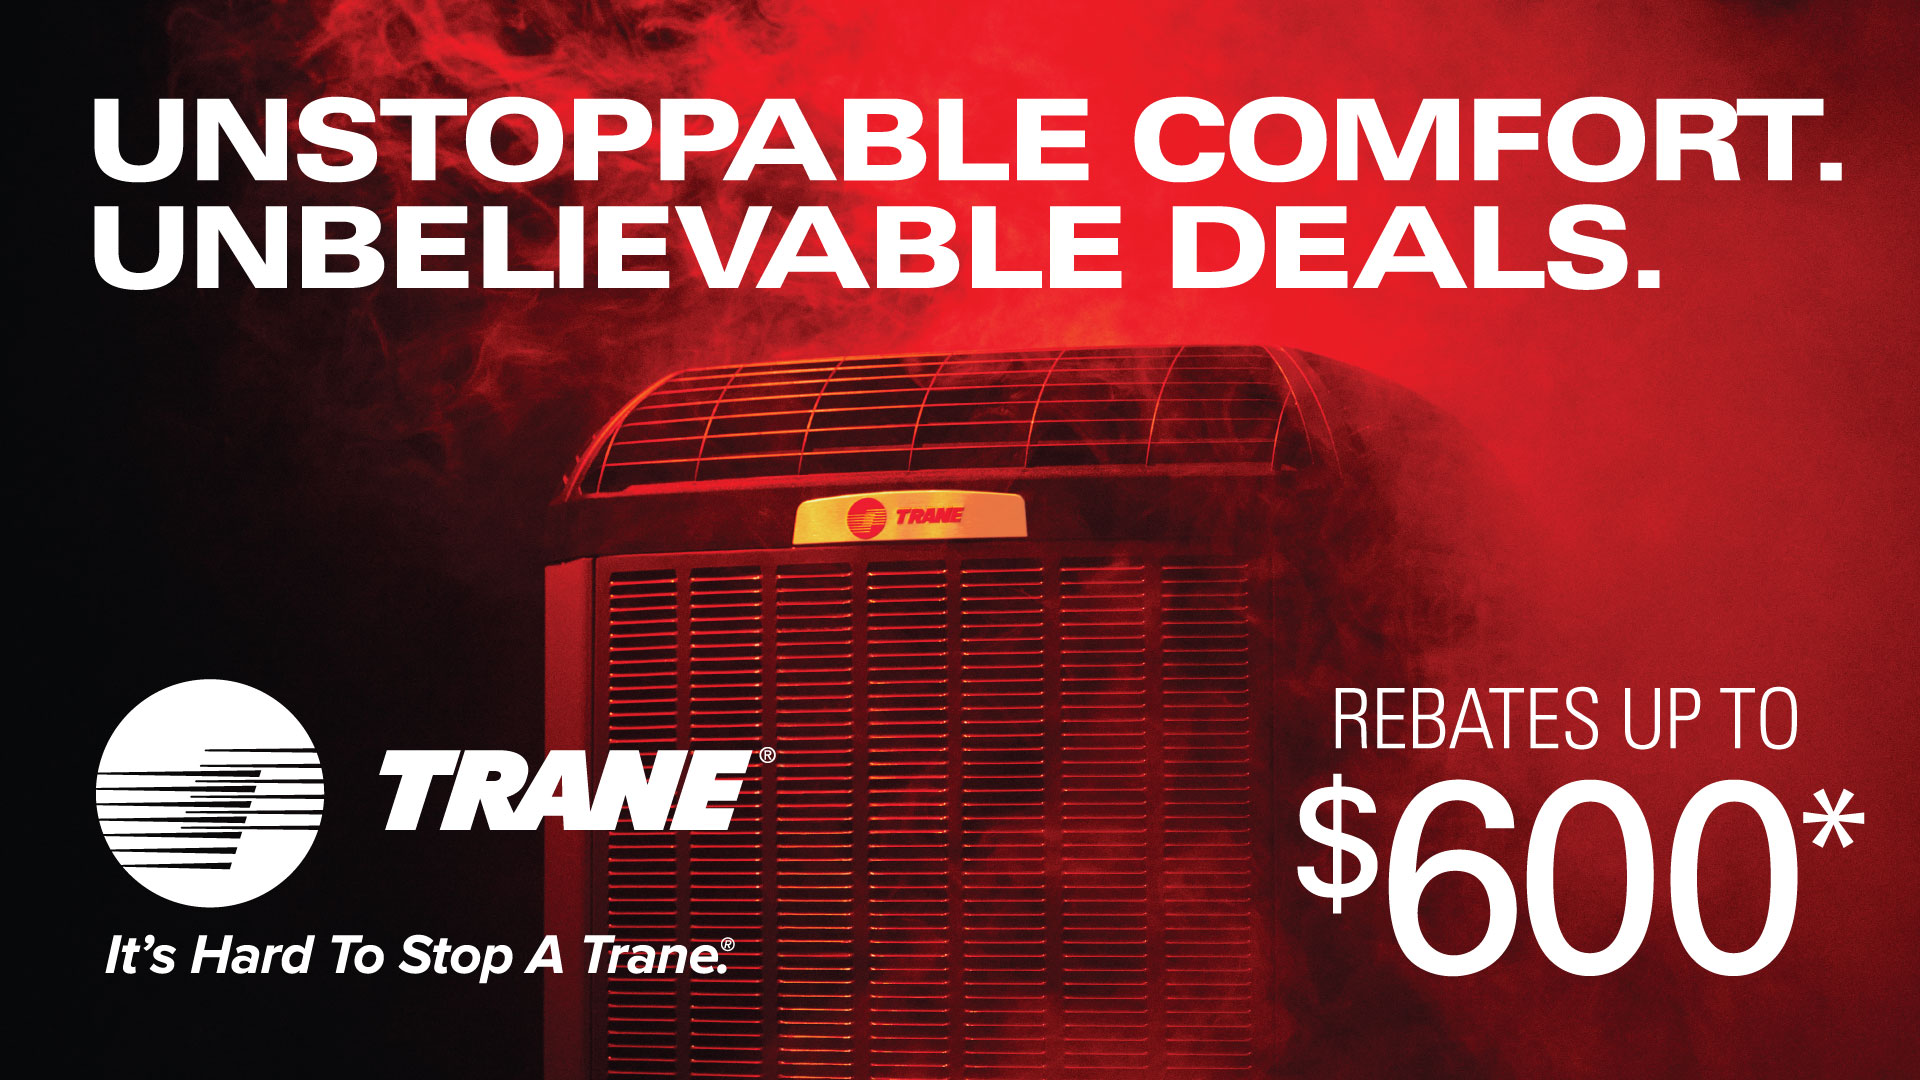 Trane Special Financing for 72 months